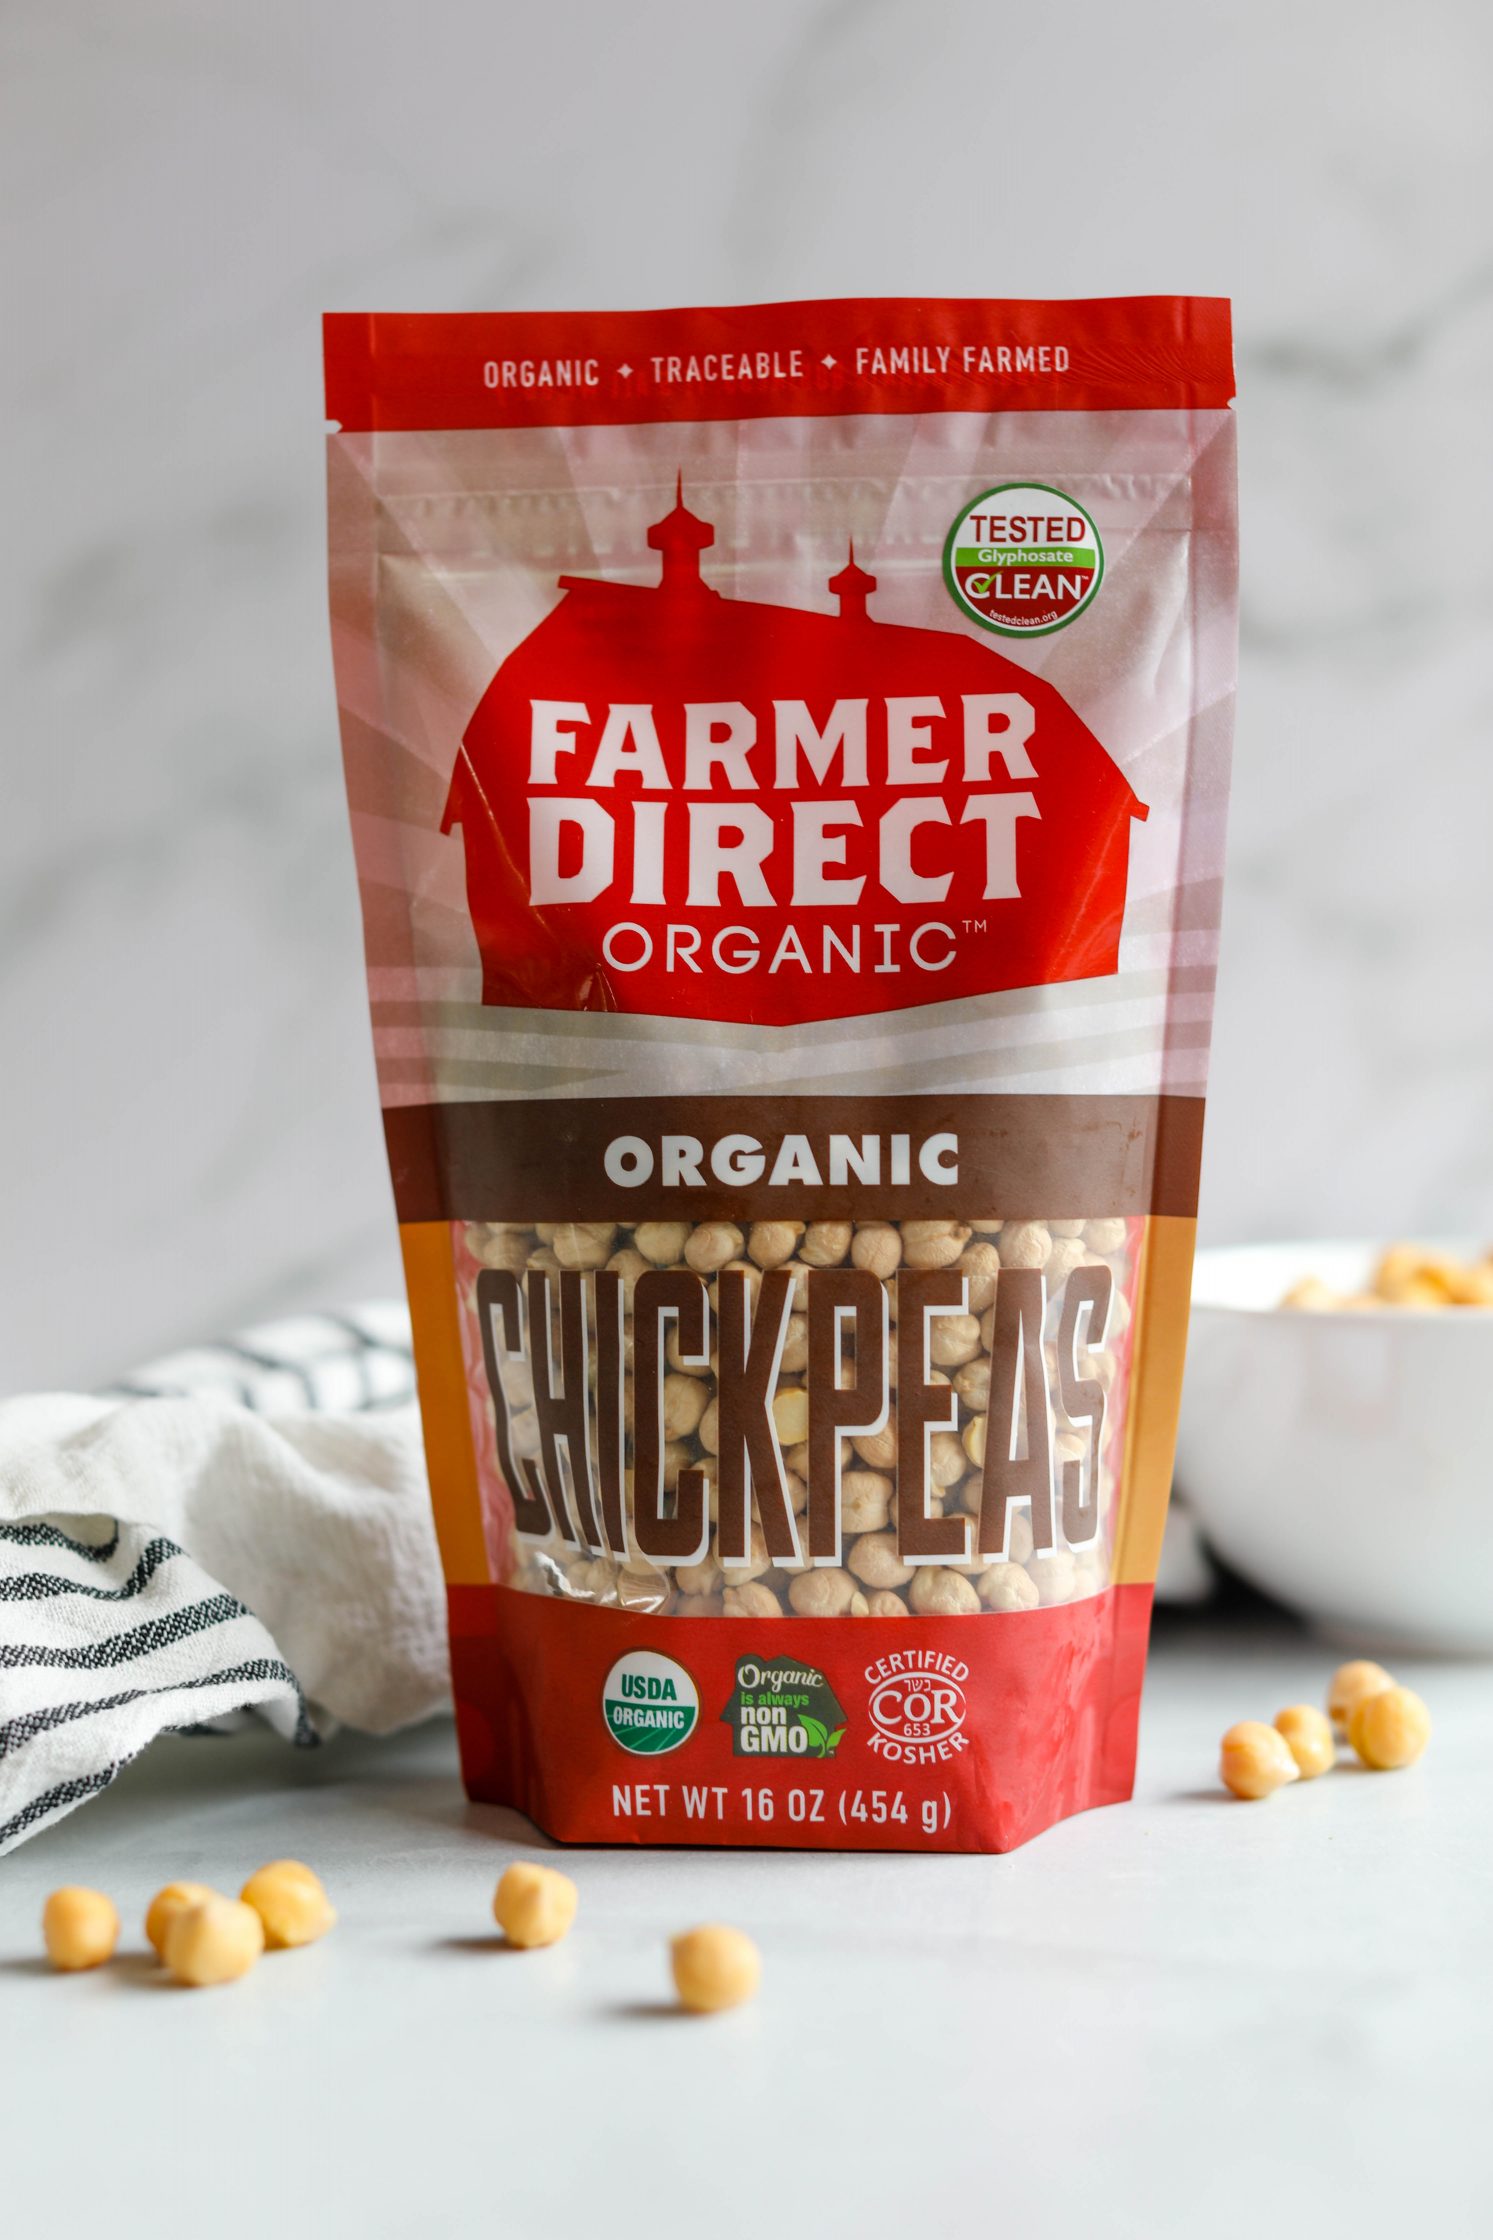 Farmer Direct Organic Chickpeas with chickpeas scattered 